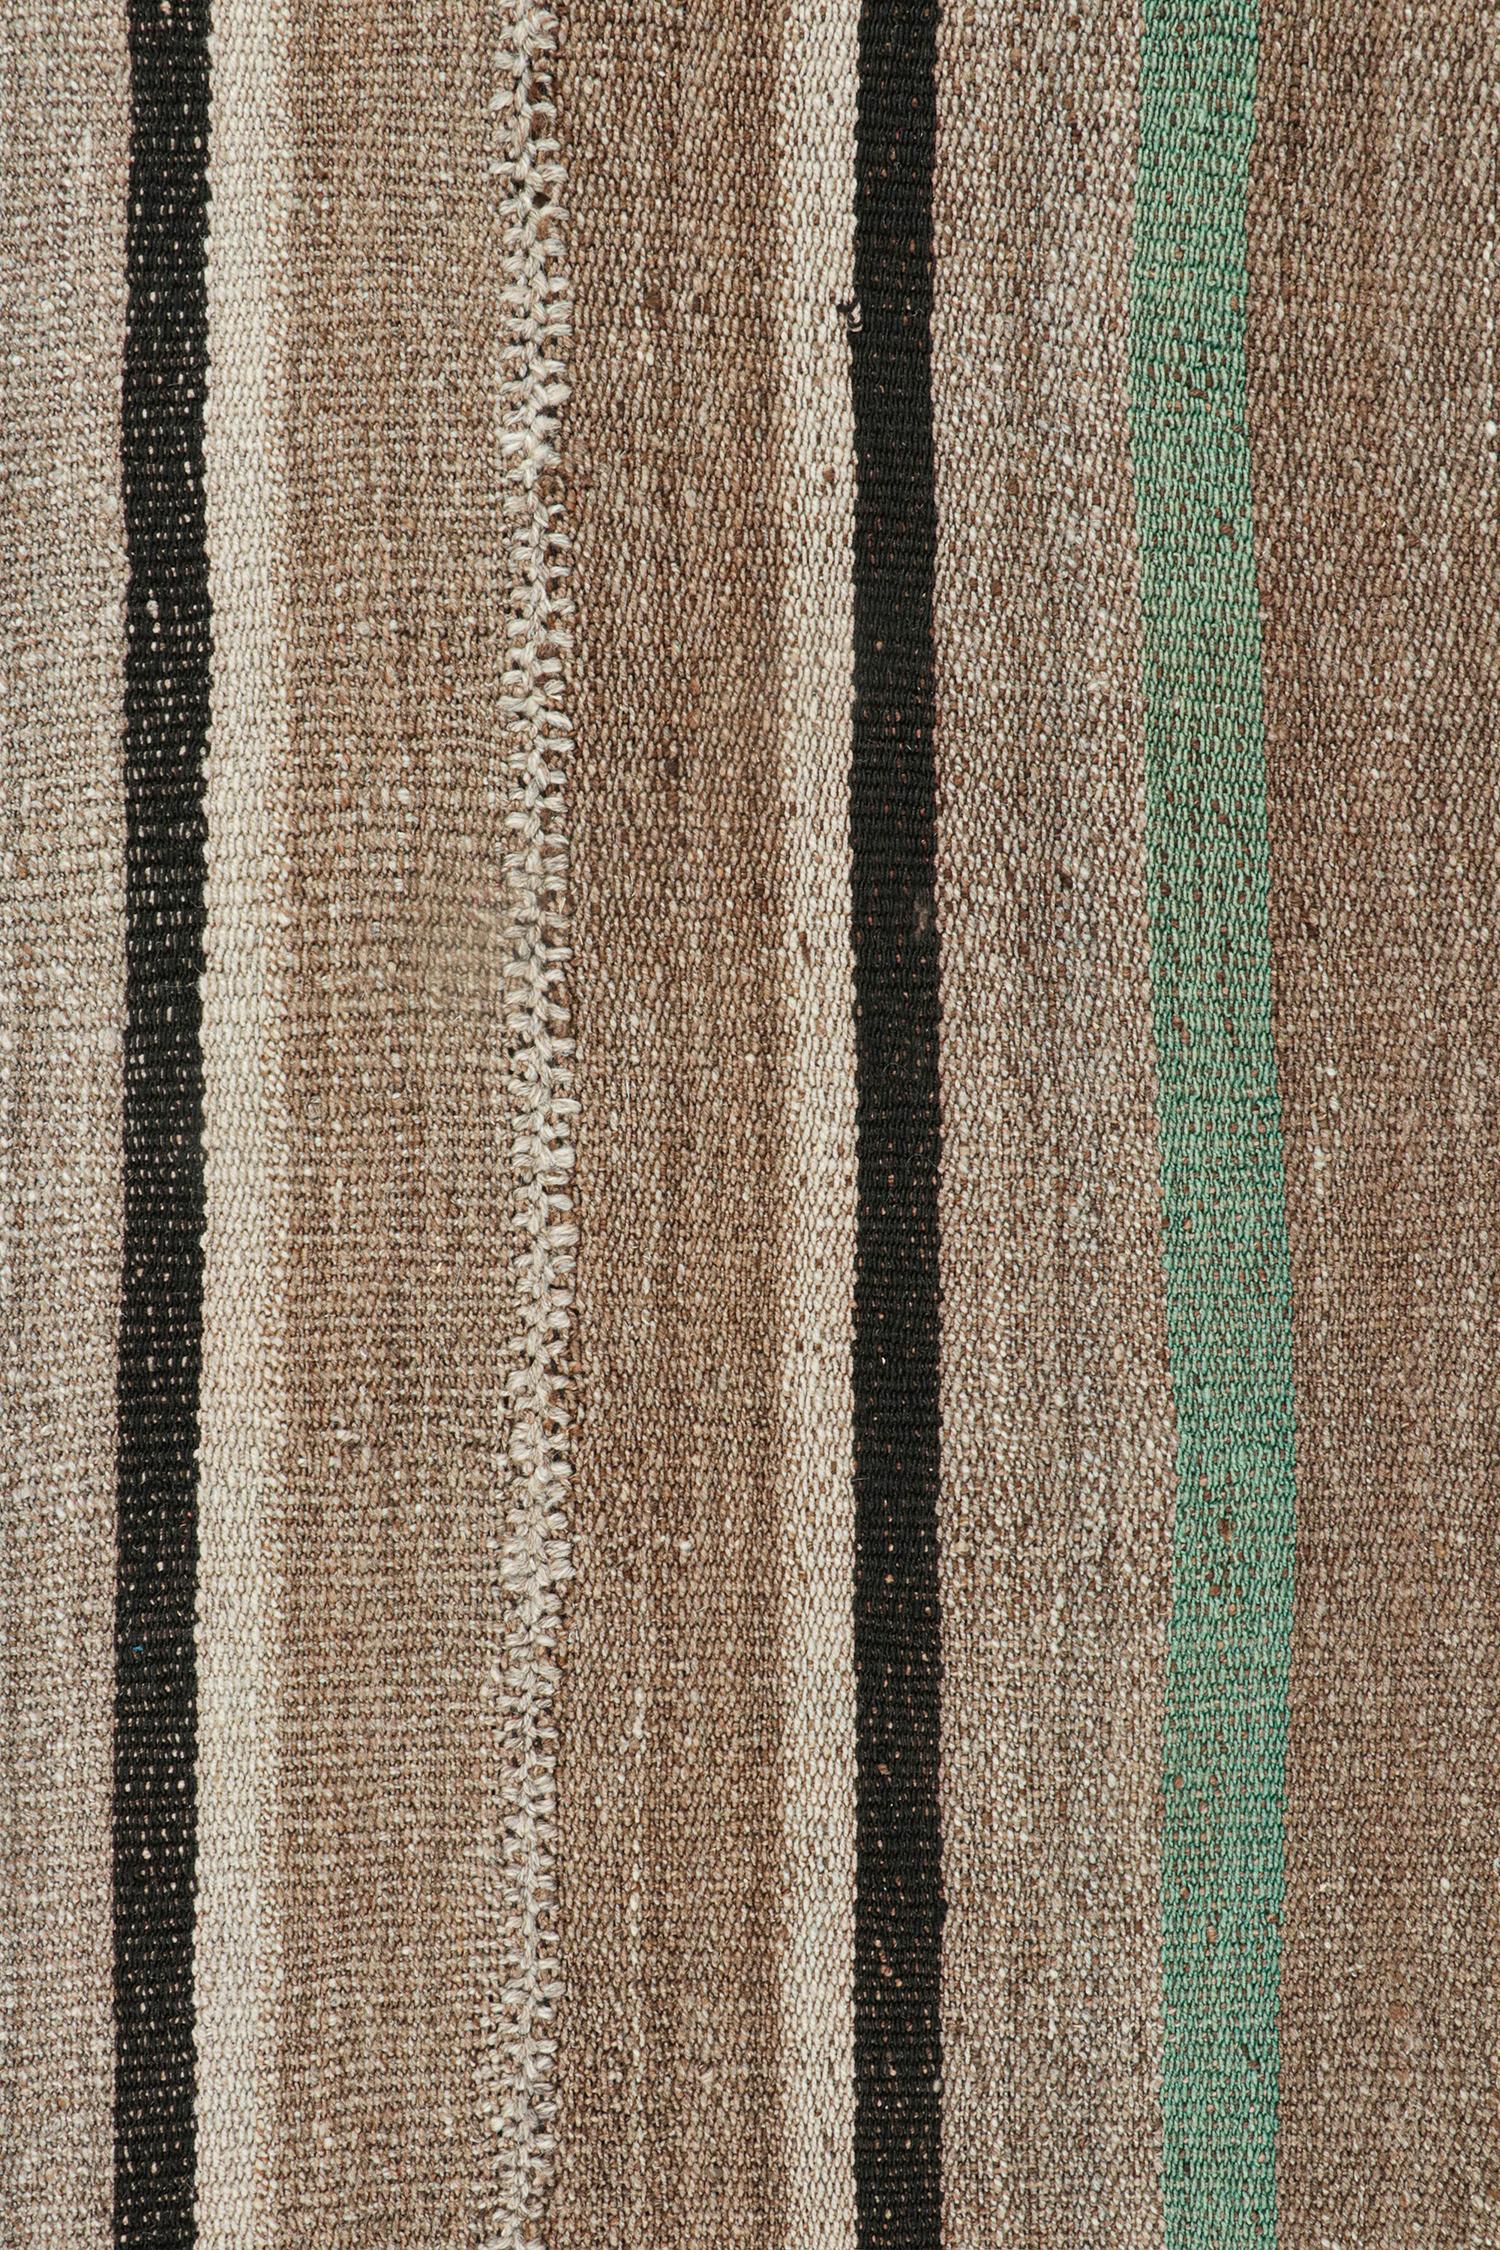 Mid-20th Century Vintage Persian Kilim with Vibrant Polychromatic Stripes For Sale